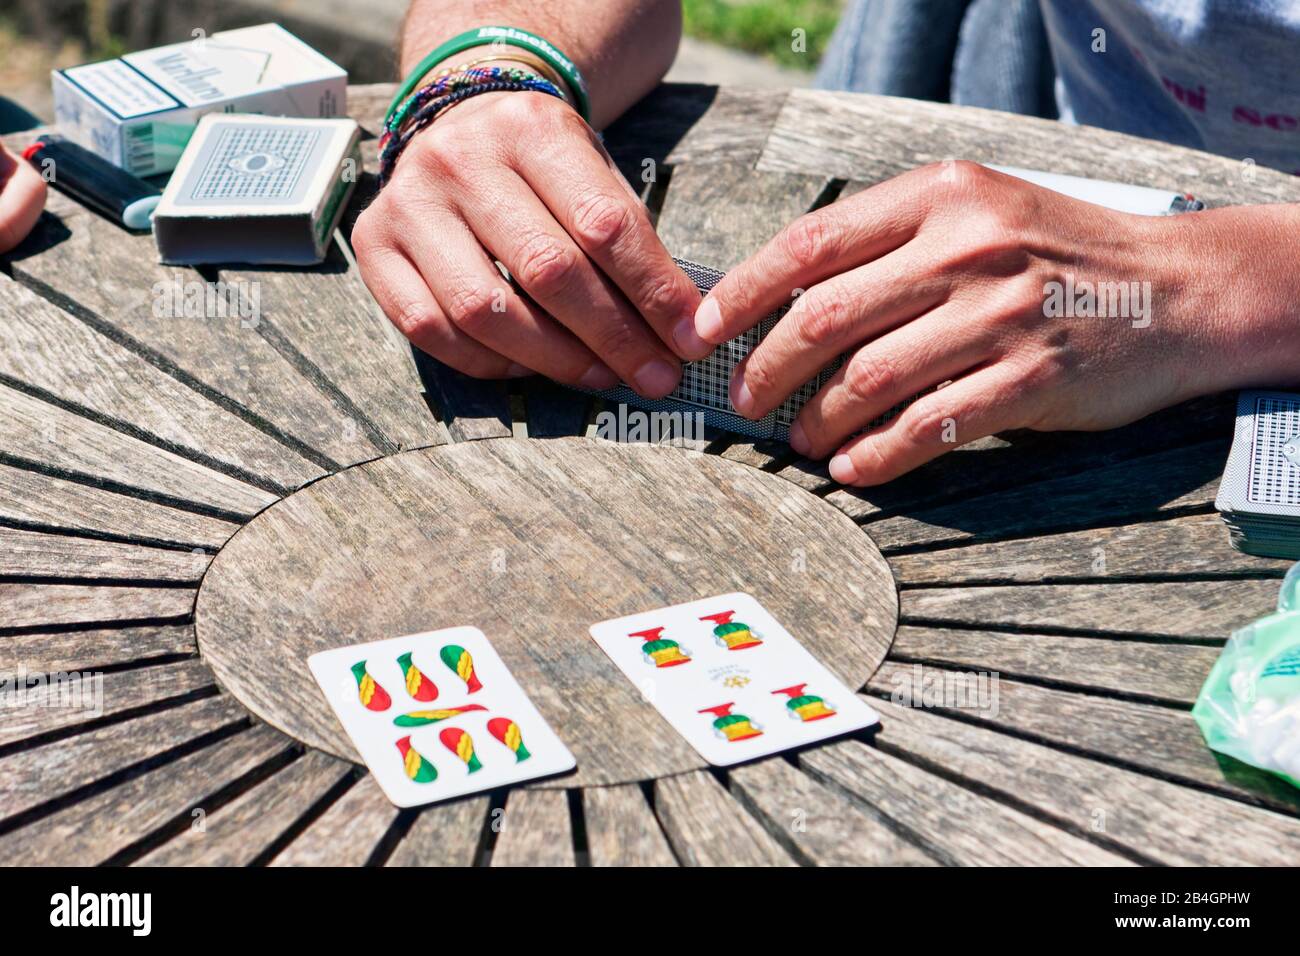 Turin, Italy - May 15, 2014: During coffee break, the employees play Trump with typical Neapolitan cards on a wooden table. Stock Photo